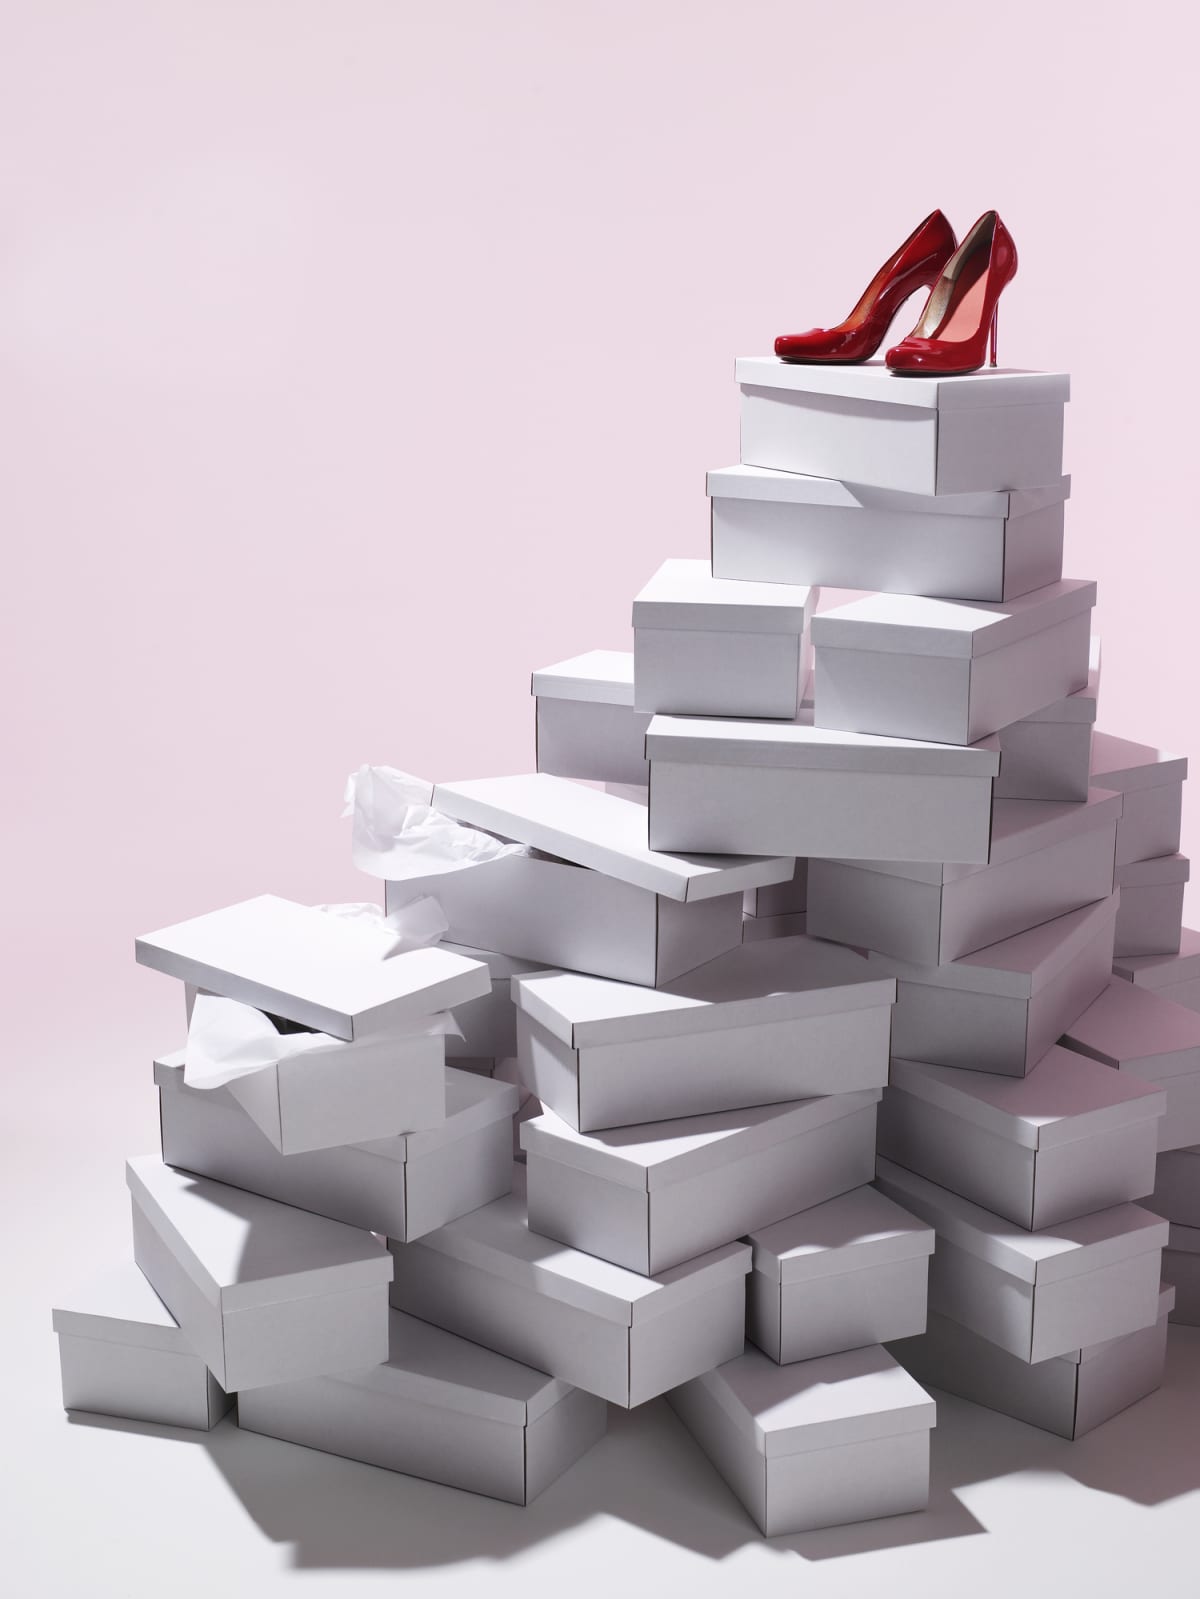 A pair of red shoes positioned atop a stack of shoe boxes